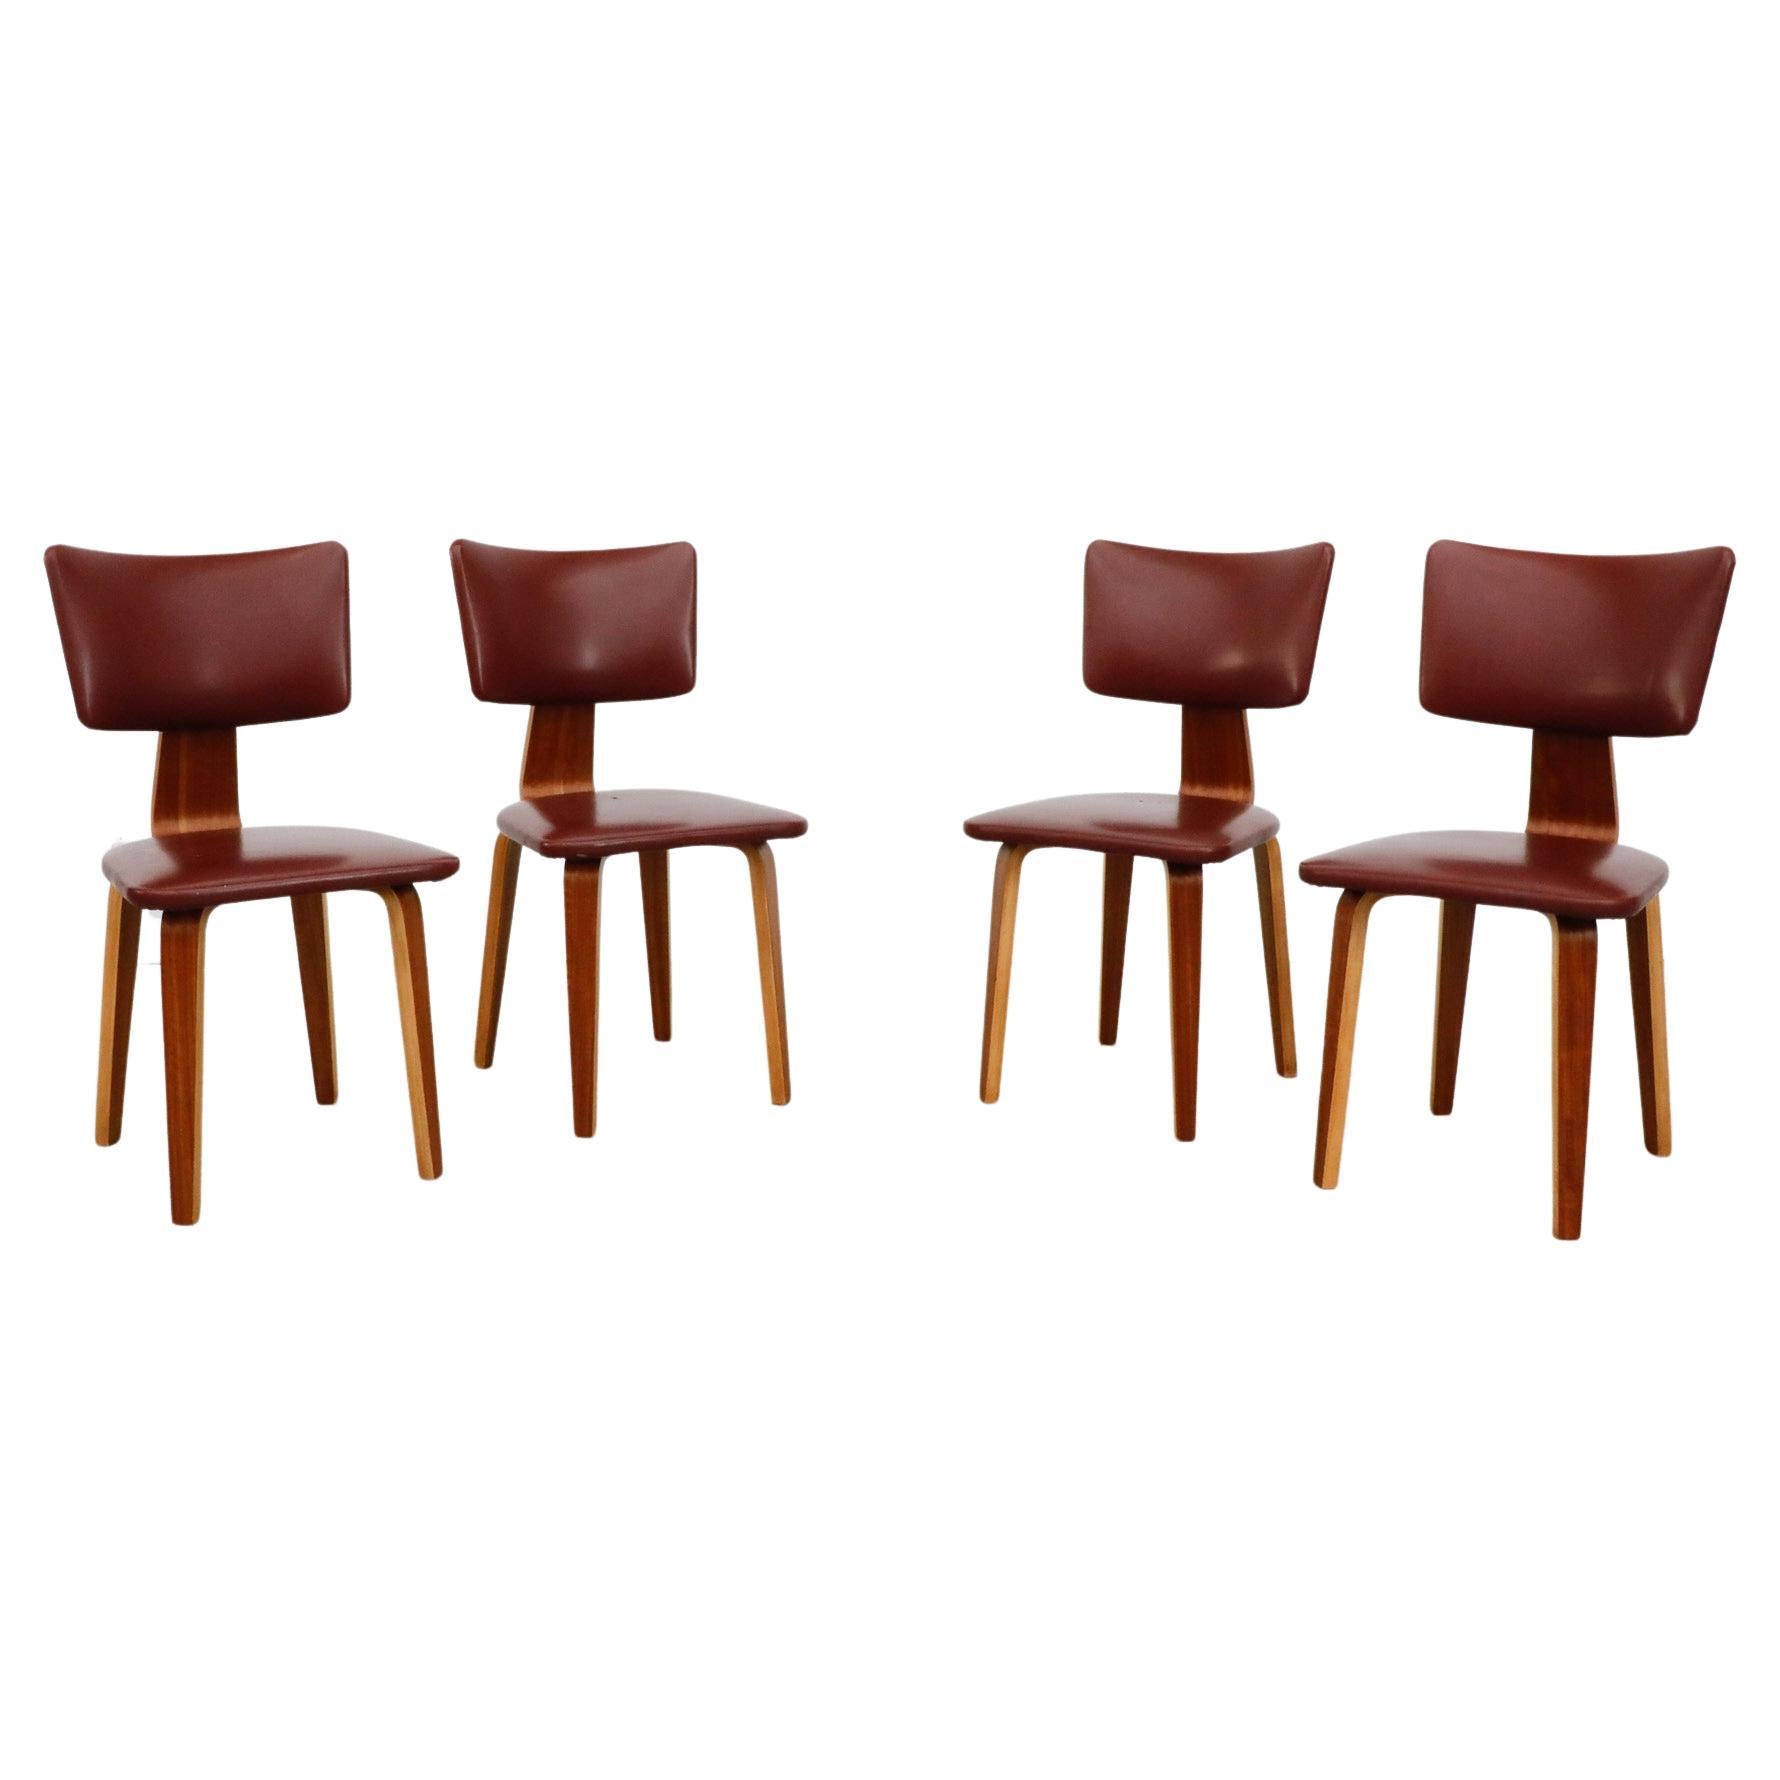 Set of 4 Cor Alons Teak and Burgundy Skai Dining Chairs